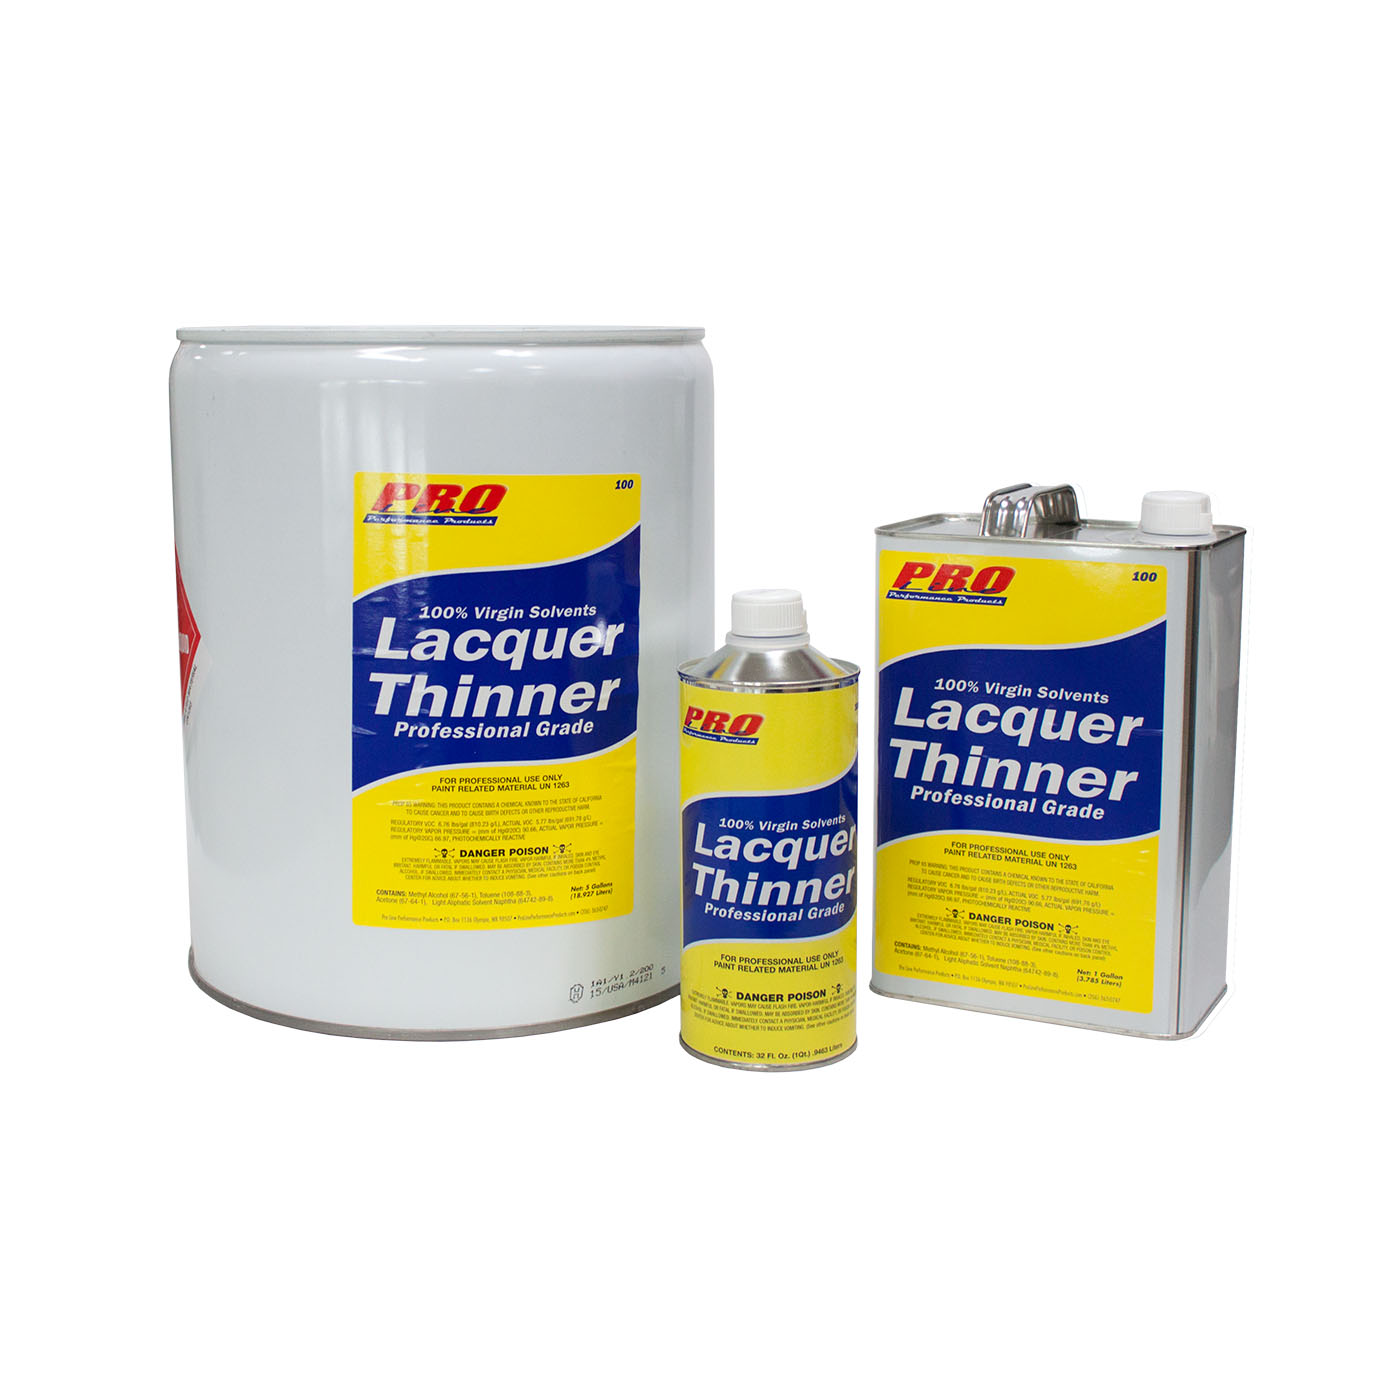 Green Lacquer Thinner Products & Solvents